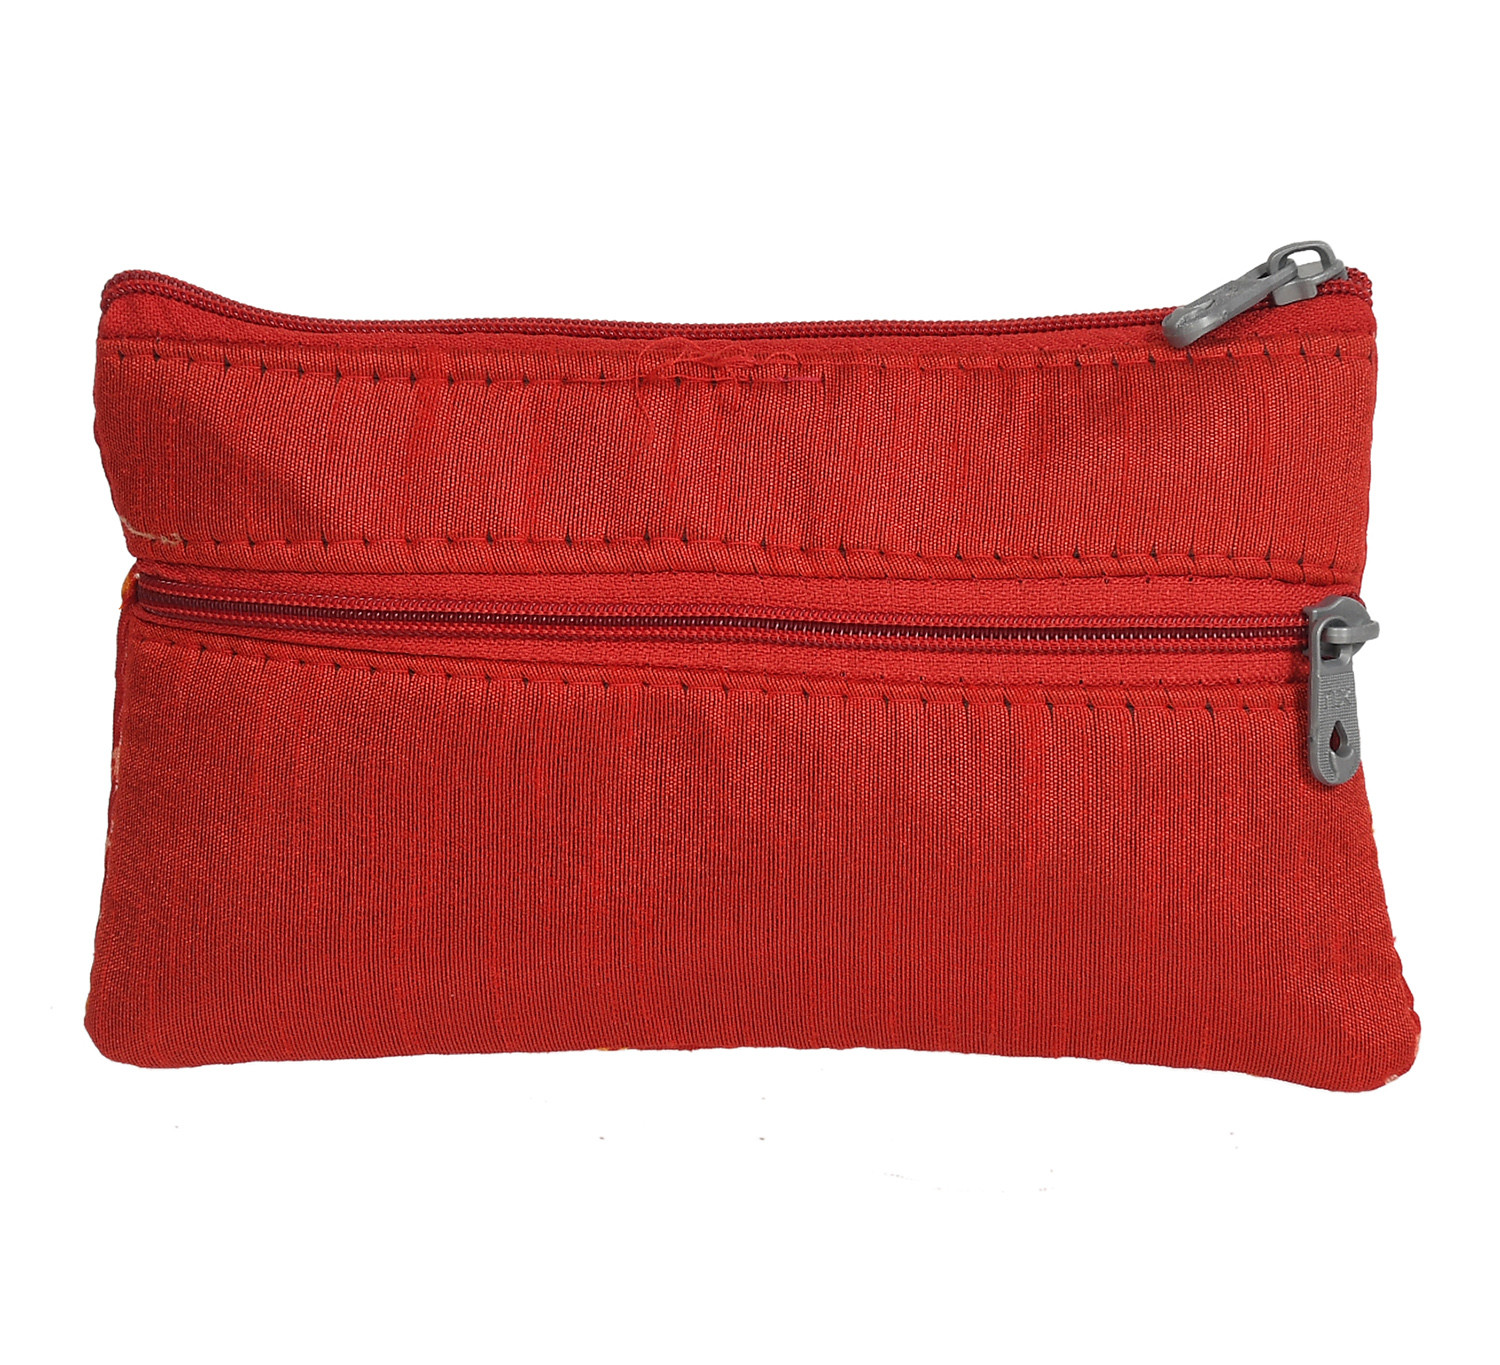 Kuber Industries Polyester Bandhani Print Purse For Woman/Girl Set Of 2 (Red) 54KM4344